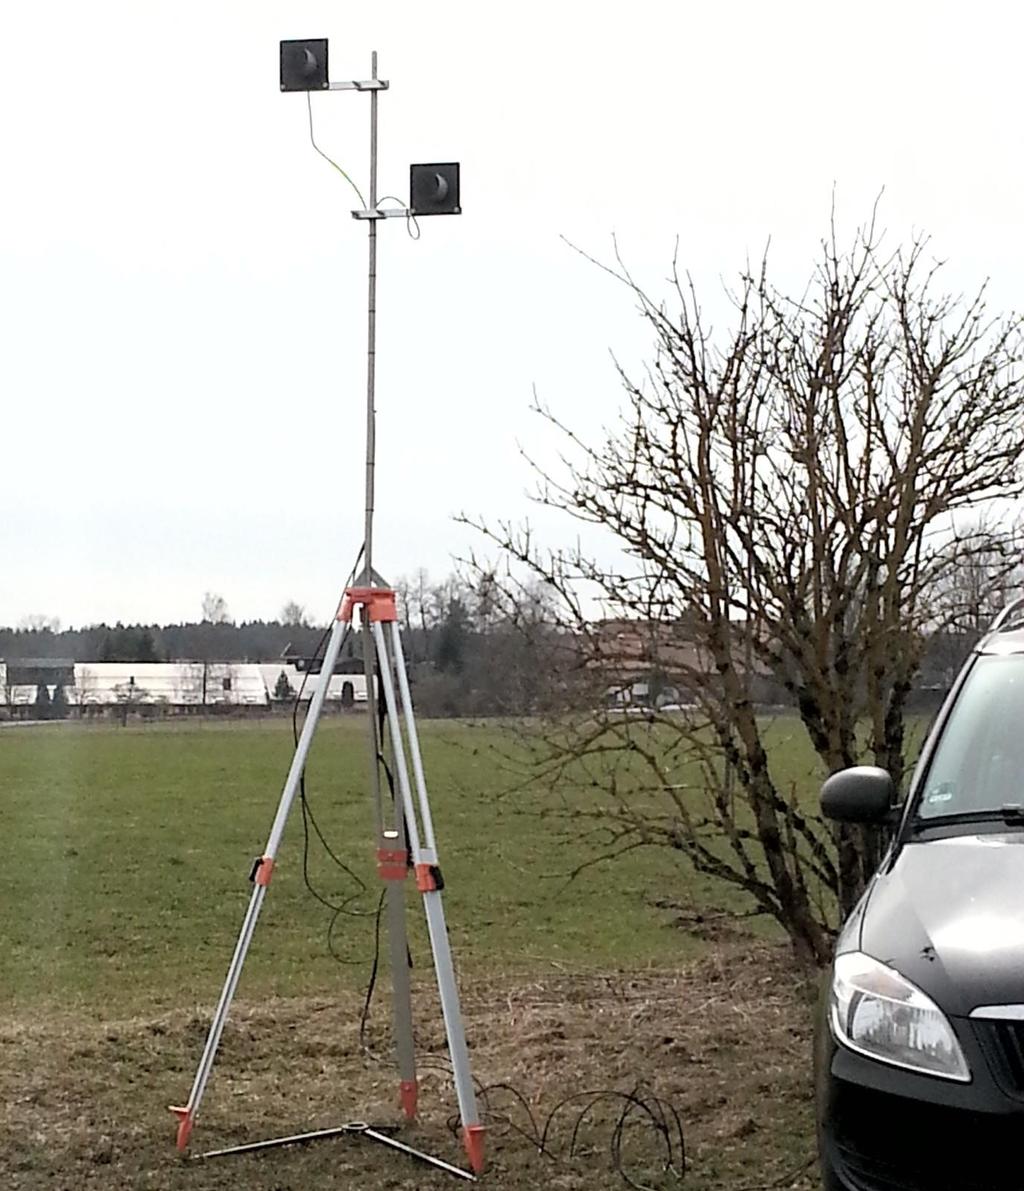 Point to Point system receiving helix antennas on 4m masts Recommend distance